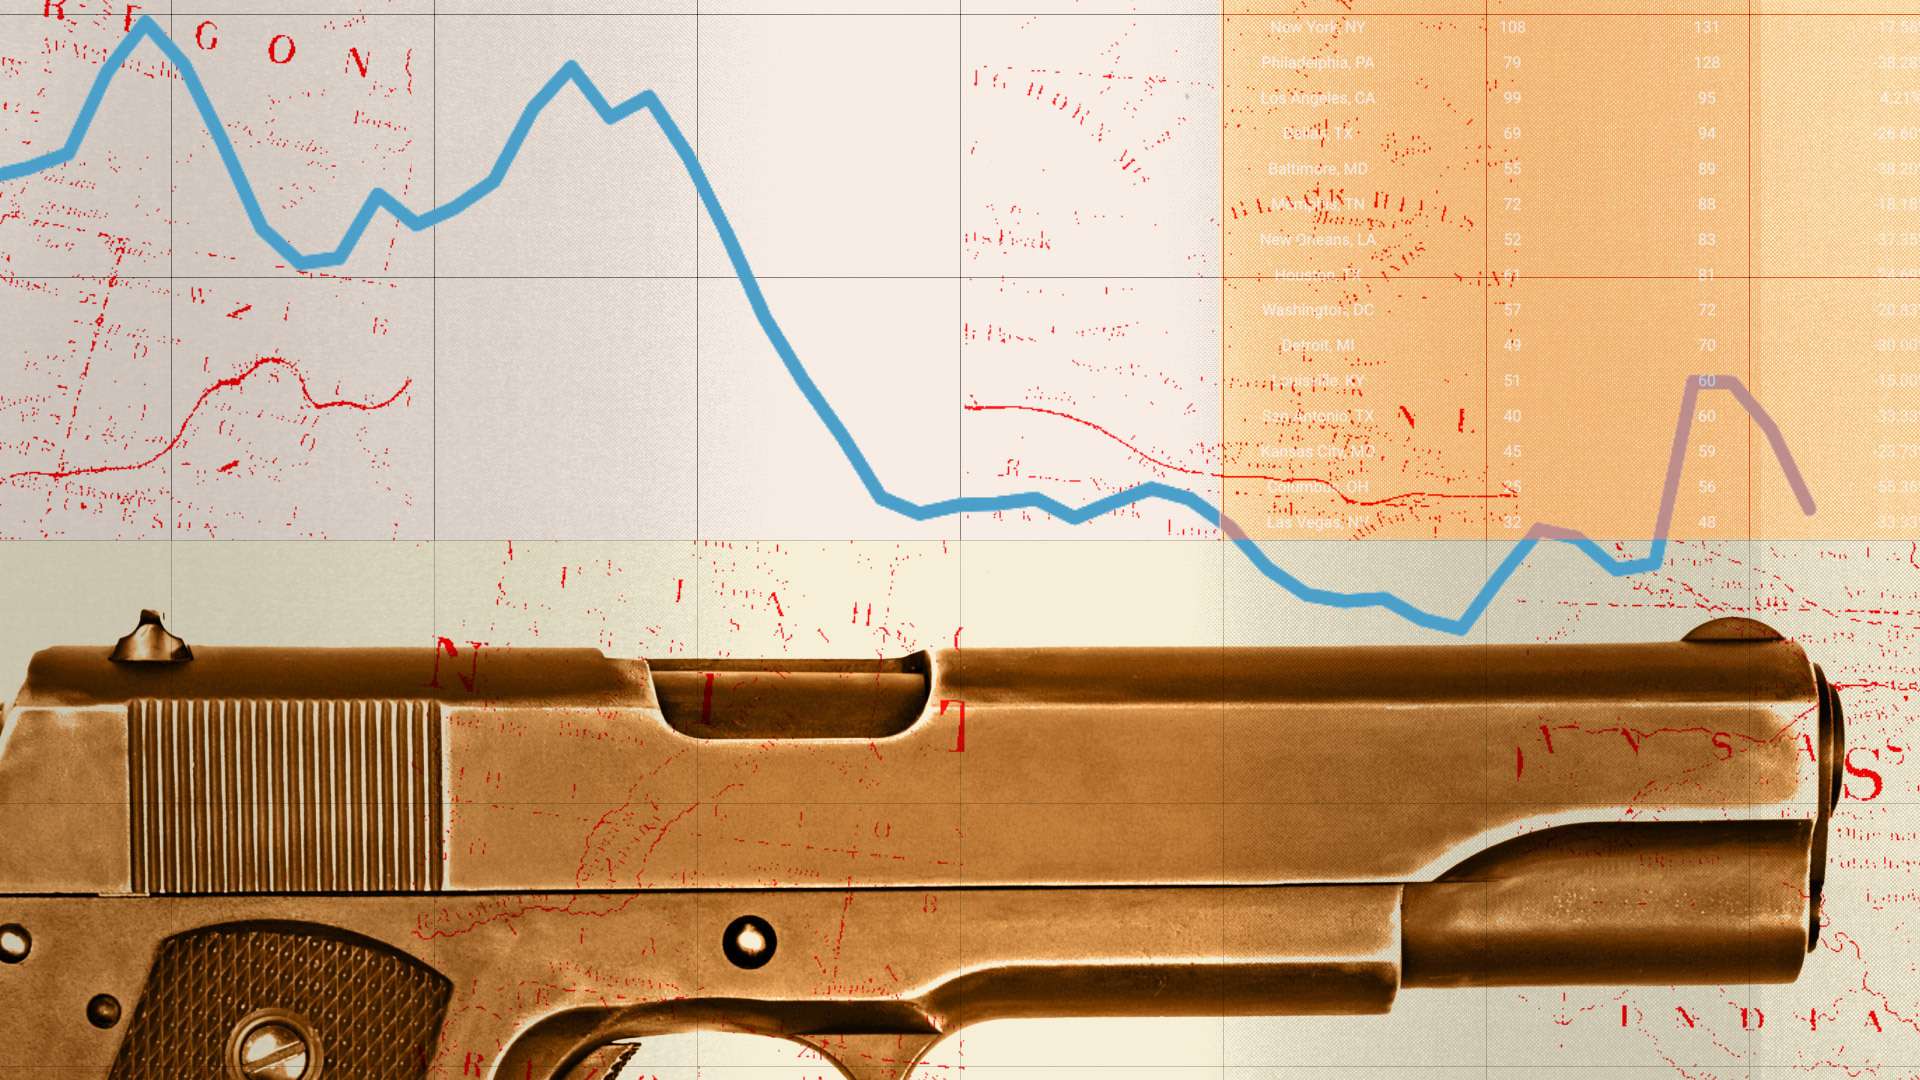 Murder Rates Are Plummeting. What Should We Make of It?